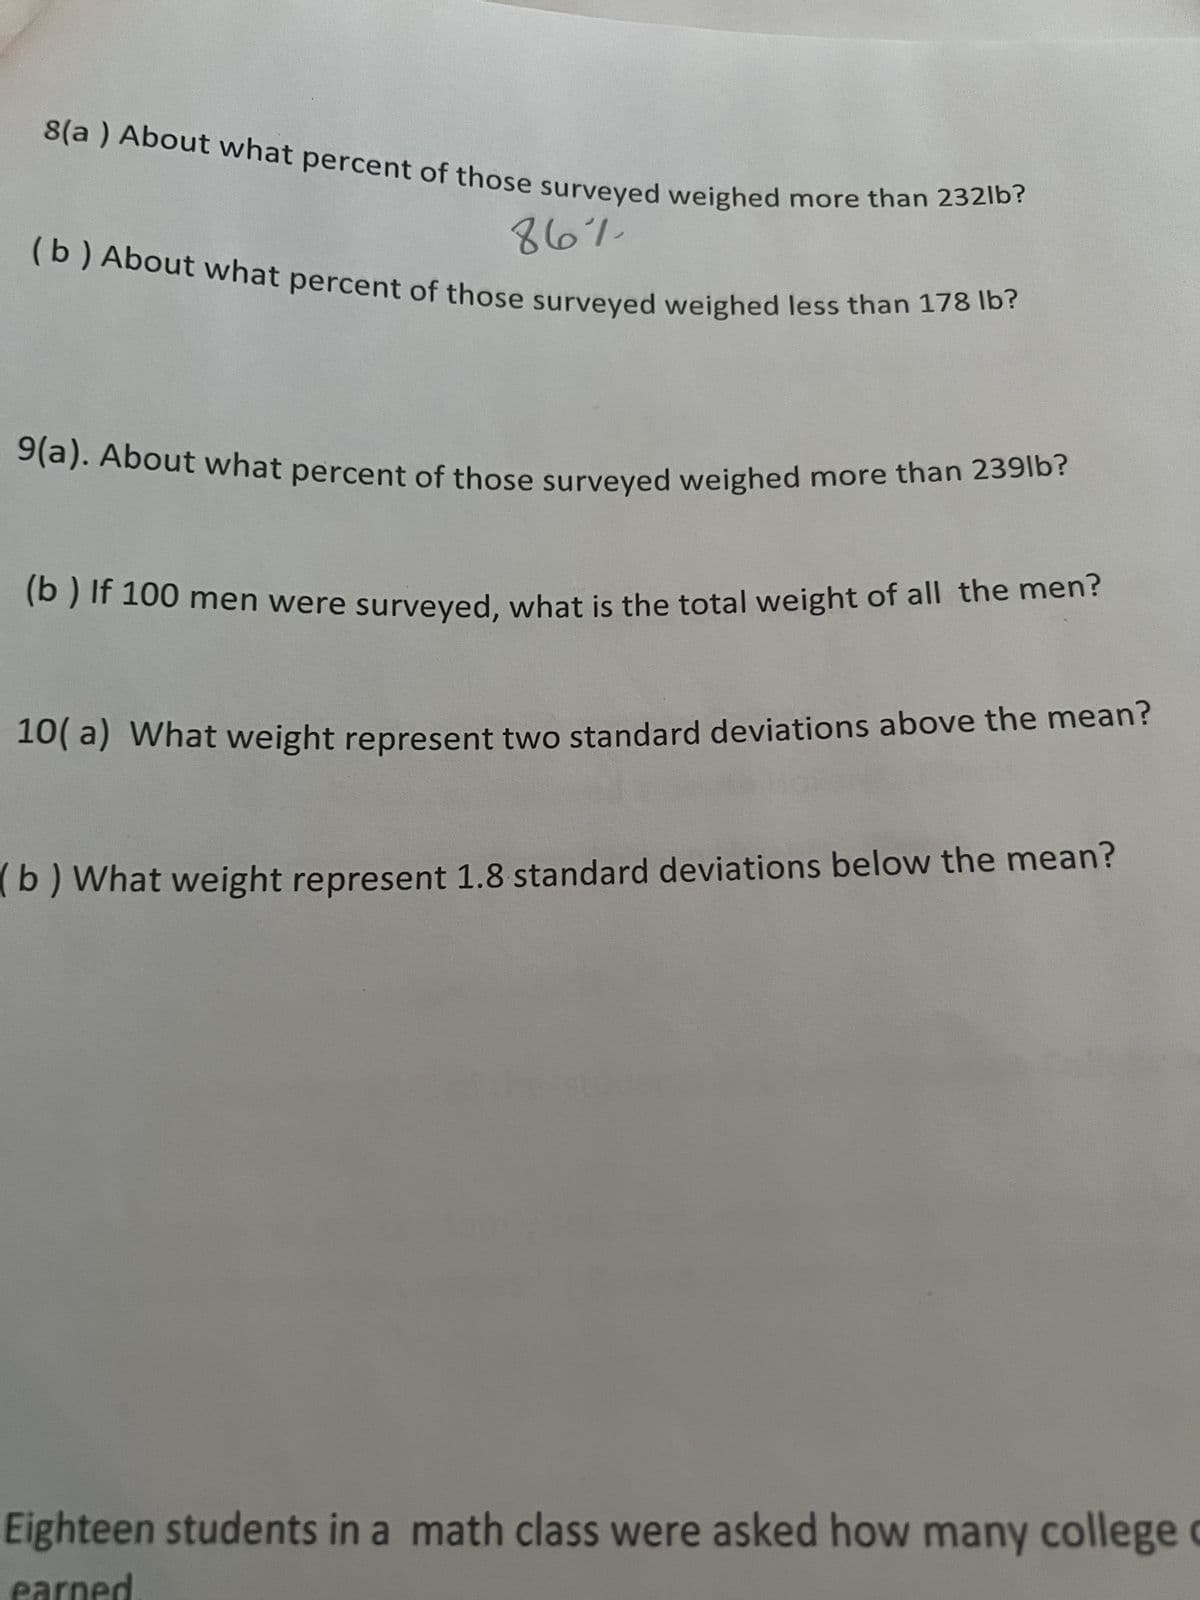 8(a) About what percent of those surveyed weighed more than 232lb?
86%
(b) About what percent of those surveyed weighed less than 178 lb?
9(a). About what percent of those surveyed weighed more than 239lb?
(b) If 100 men were surveyed, what is the total weight of all the men?
10(a) What weight represent two standard deviations above the mean?
b) What weight represent 1.8 standard deviations below the mean?
Eighteen students in a math class were asked how many college c
earned.